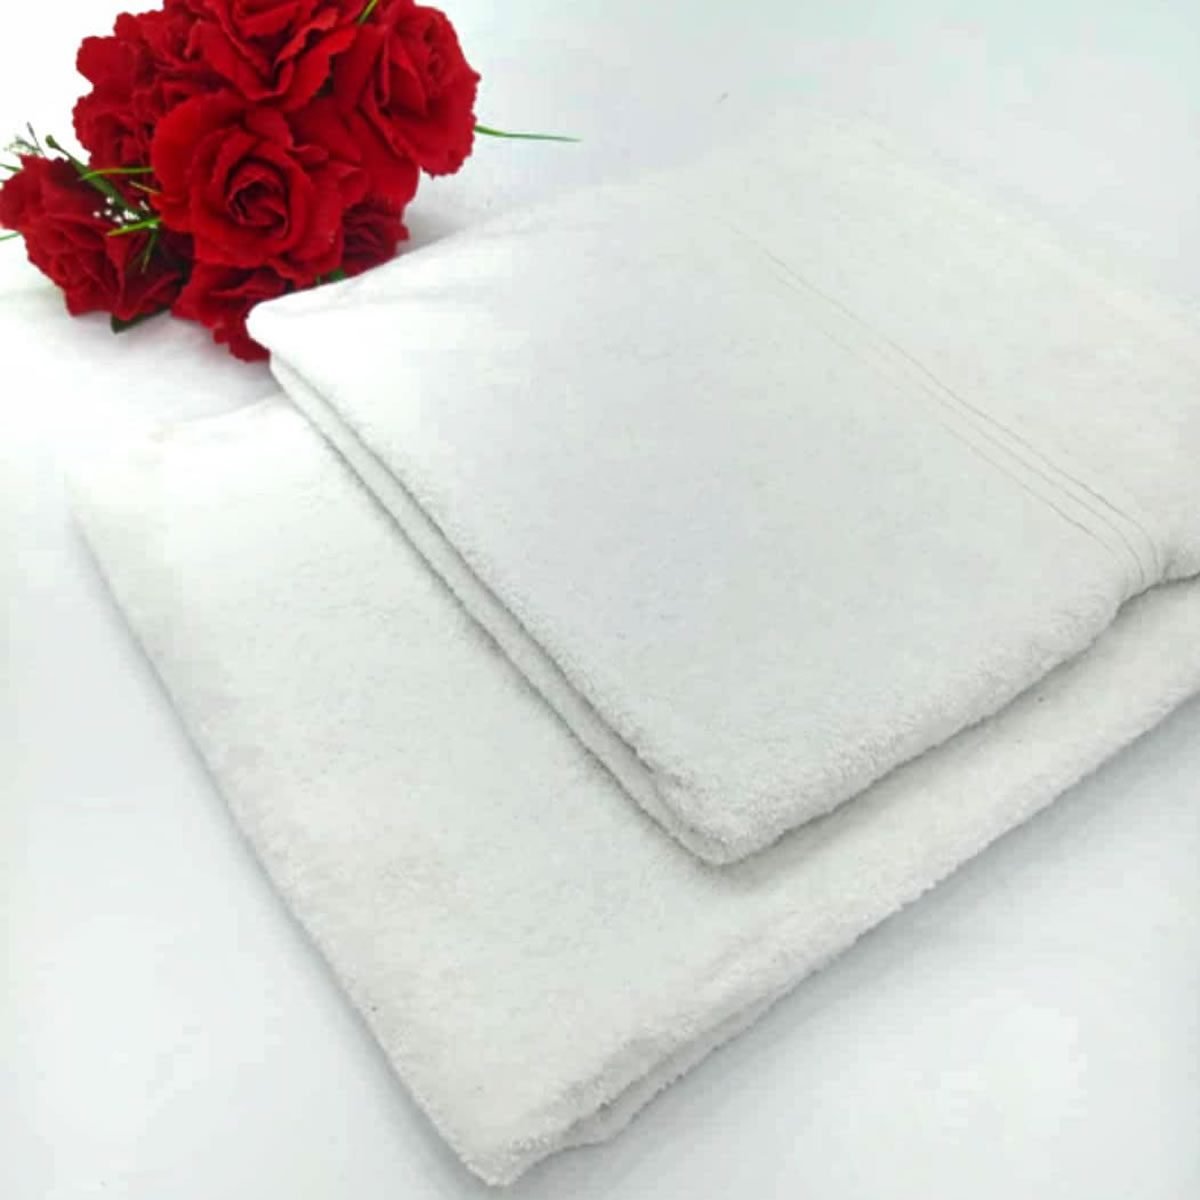 WHITE EXTRA LARGE TOWEL 35/66 INCHES